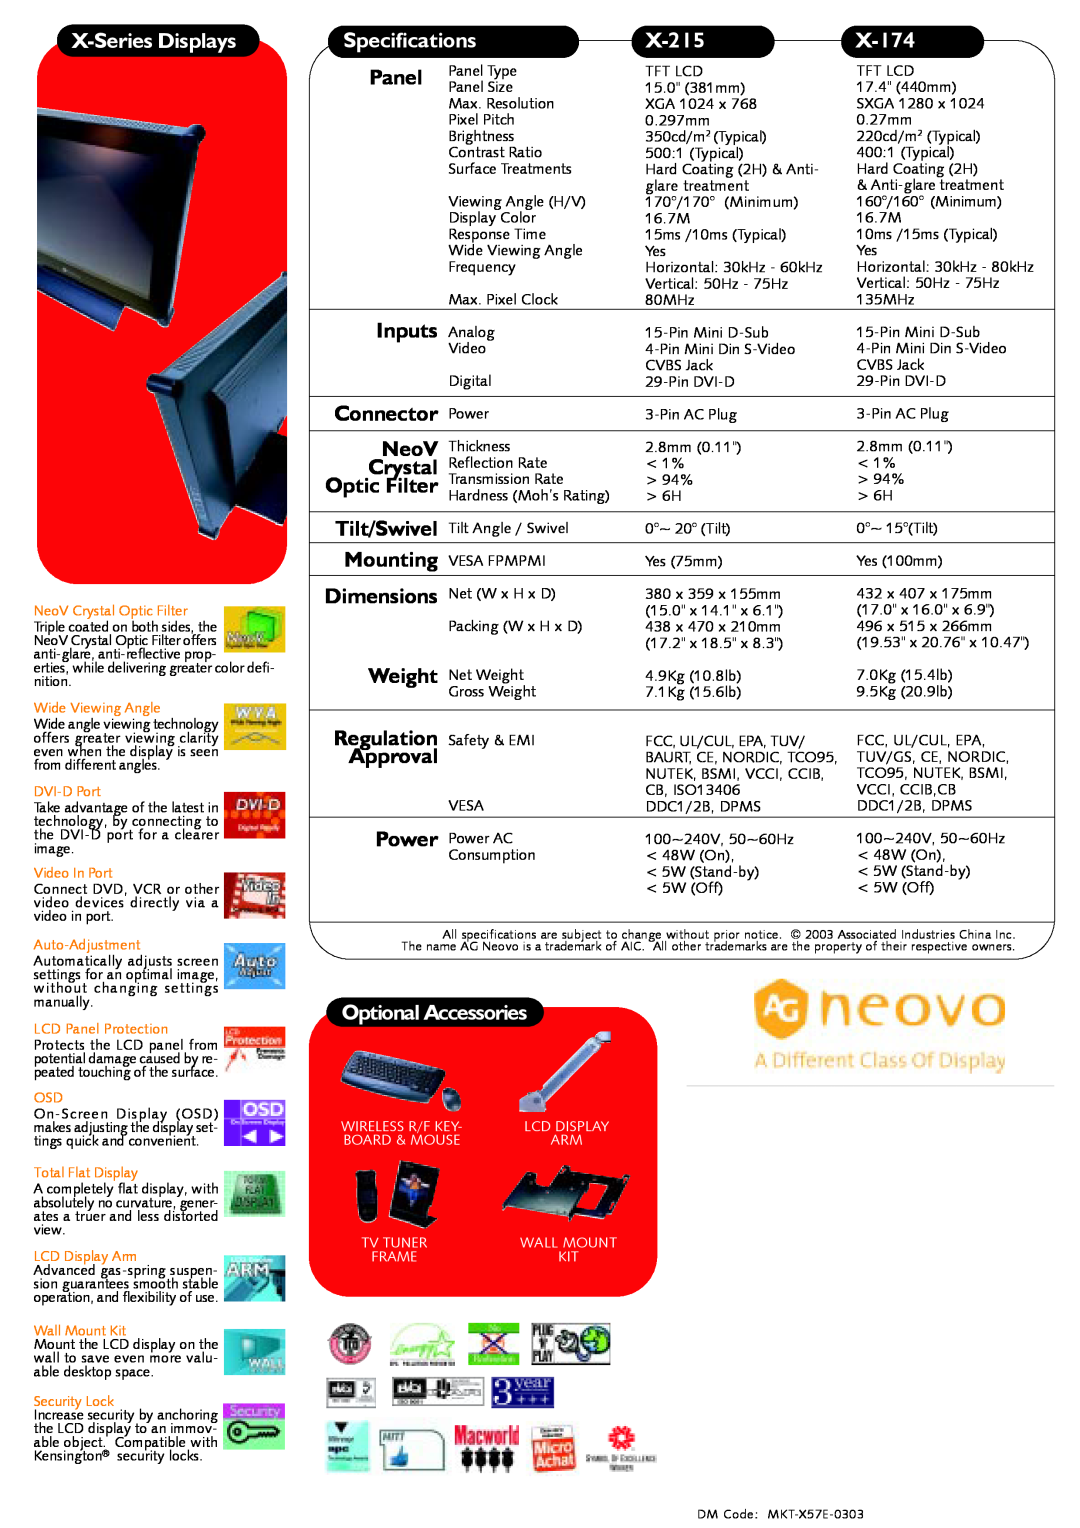 AG Neovo X-215 Panel, Inputs Analog, Connector Power, Crystal, Optic Filter, Tilt/Swivel, Mounting, Approval, X-174 